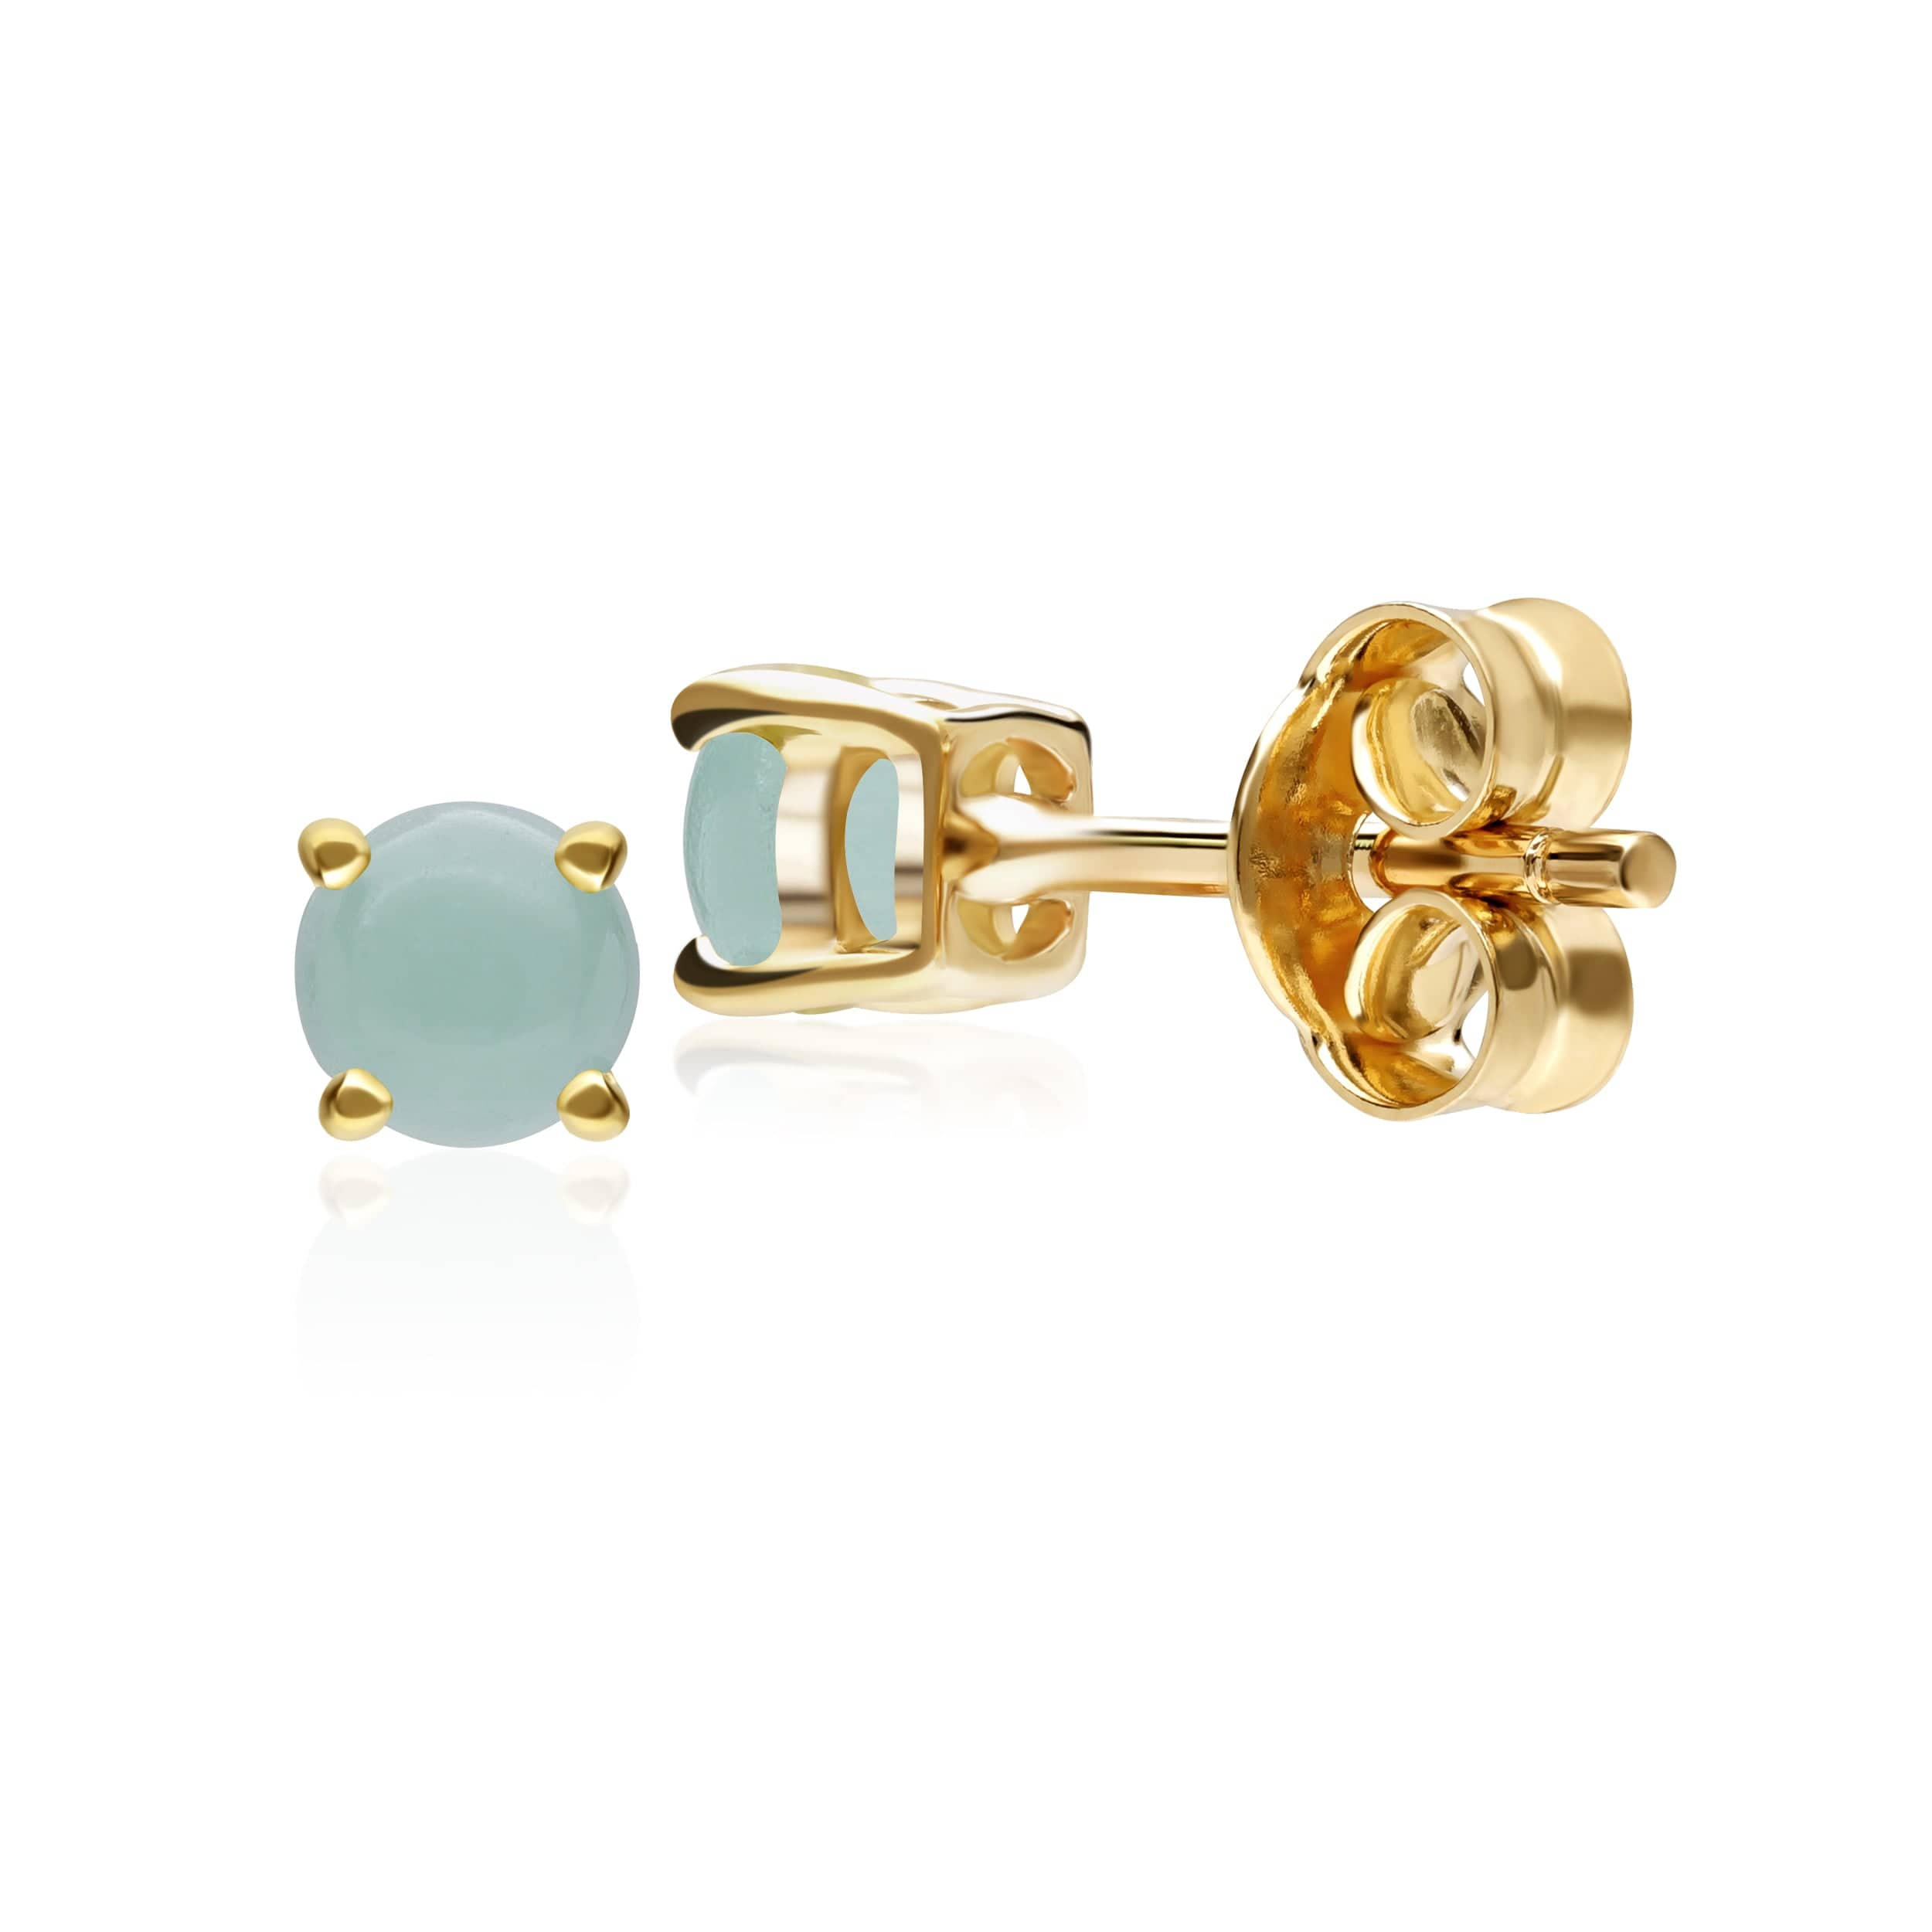 26943 Classic Round Jade Cabochon Stud Earrings in 9ct Yellow Gold 3.5mm 3